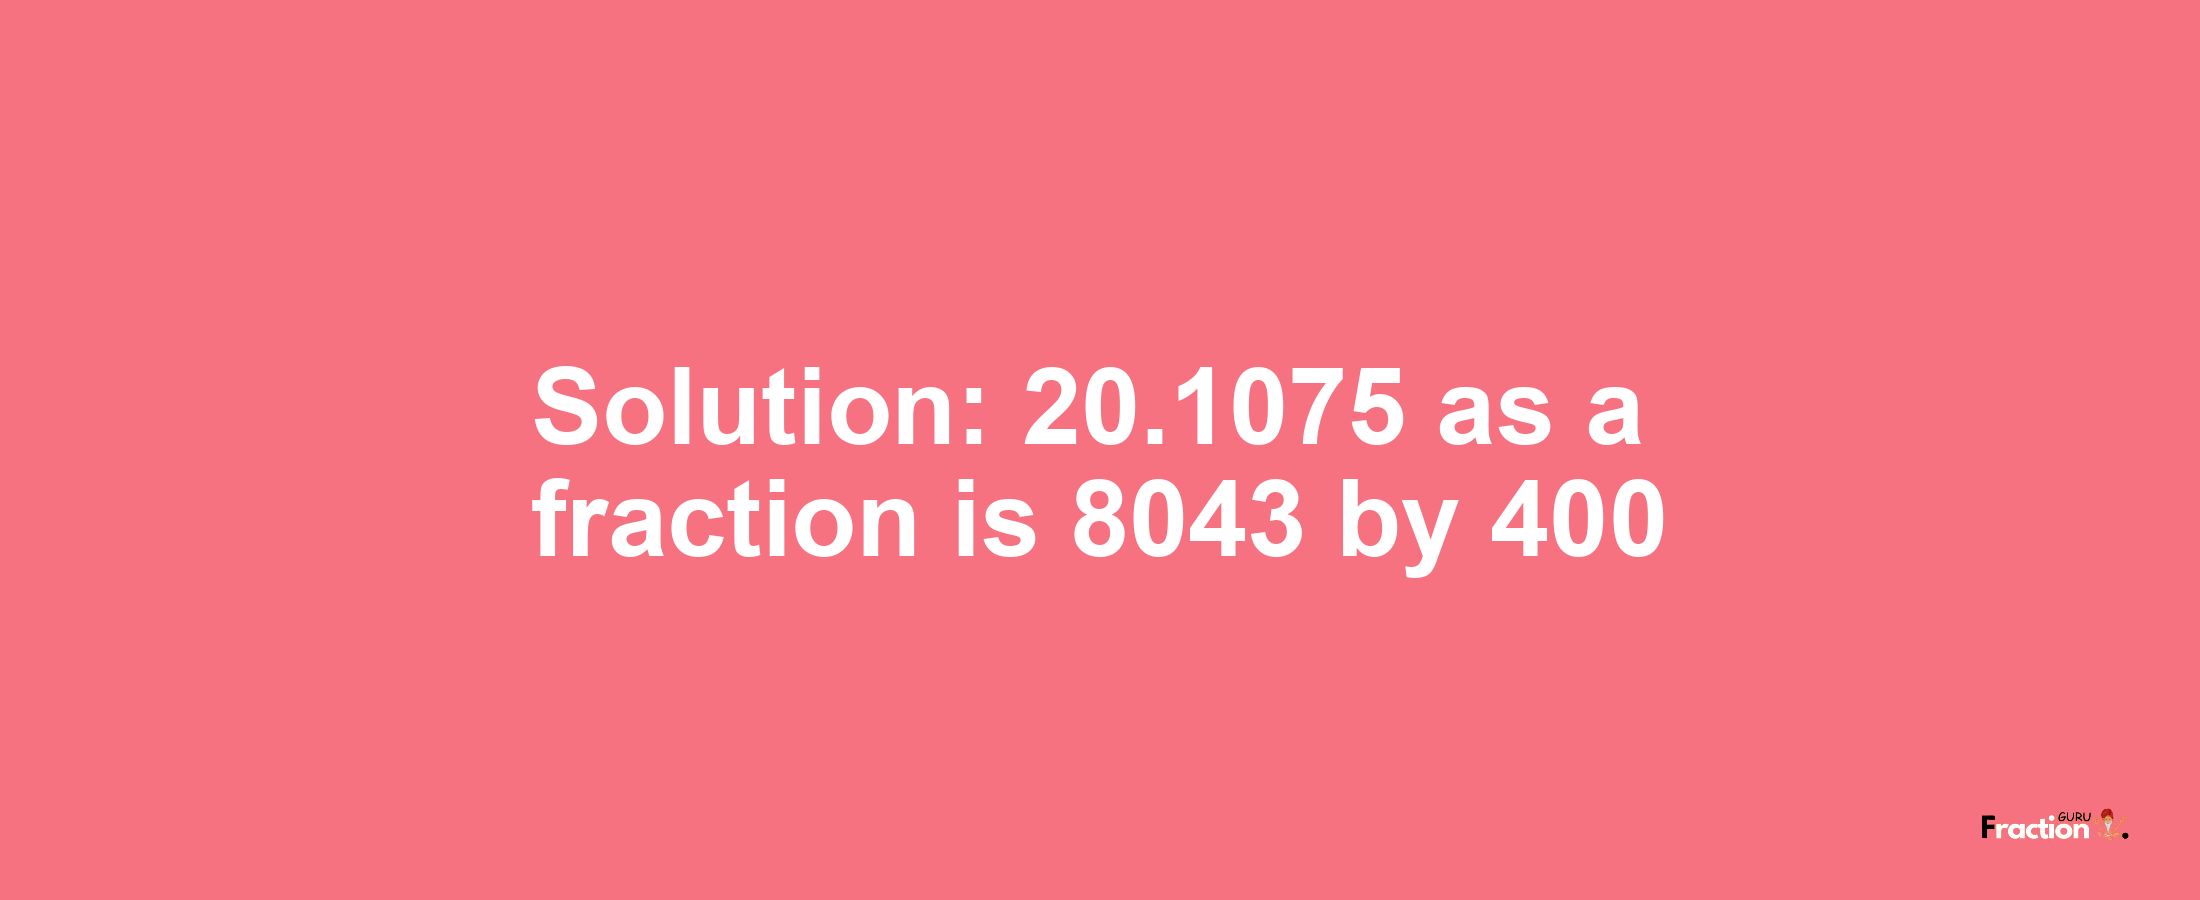 Solution:20.1075 as a fraction is 8043/400